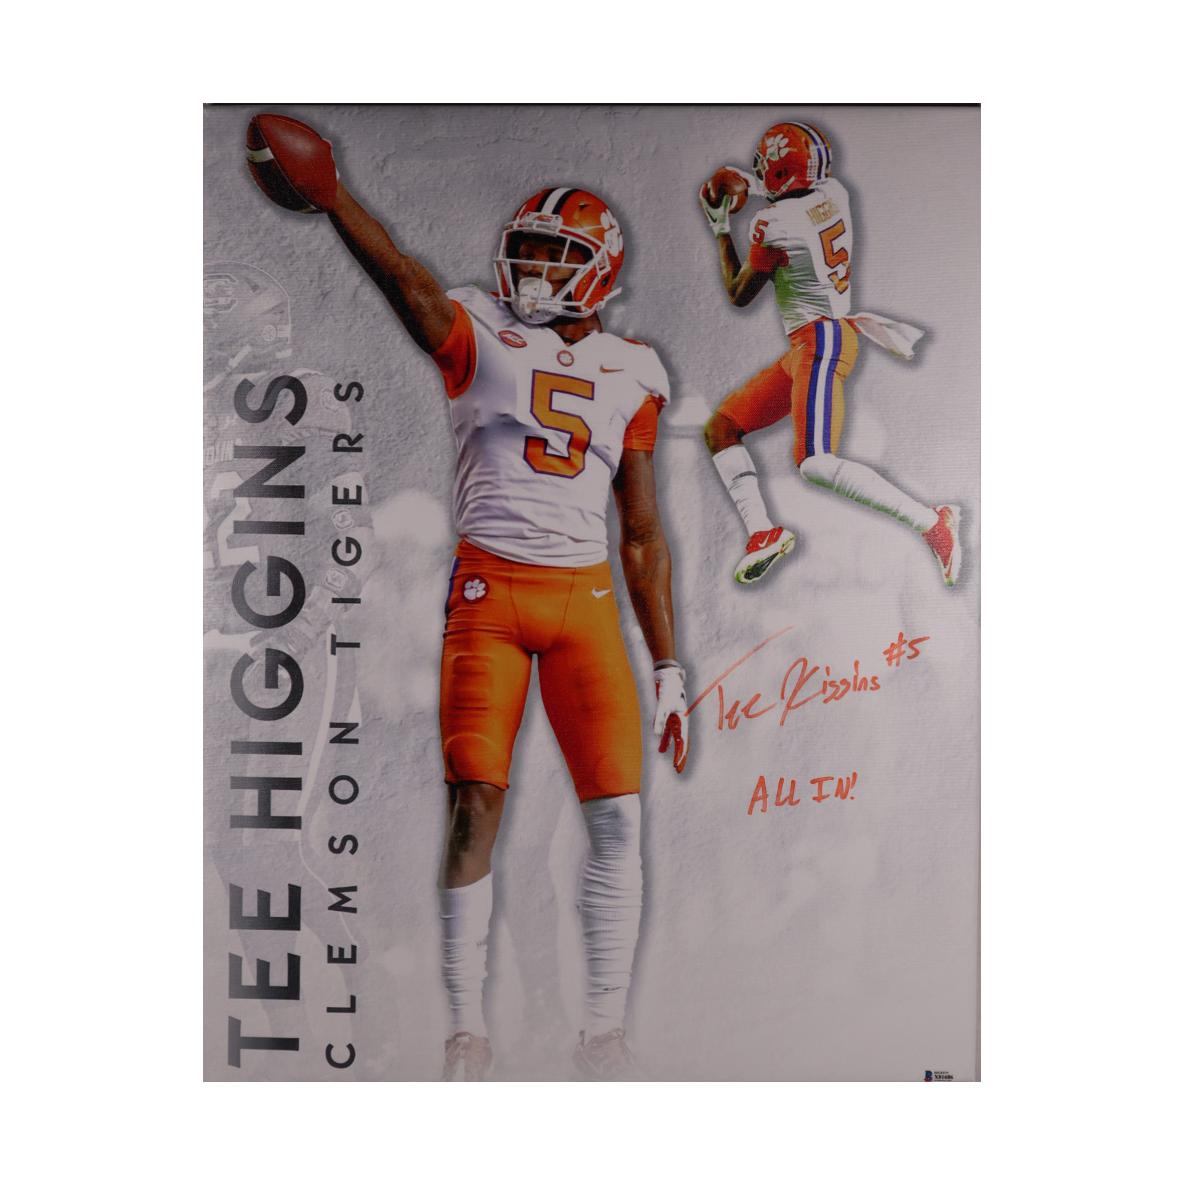 Tee Higgins Signed 20x24 Stretched Canvas Clemson Tigers Jags Autographed JSA 2